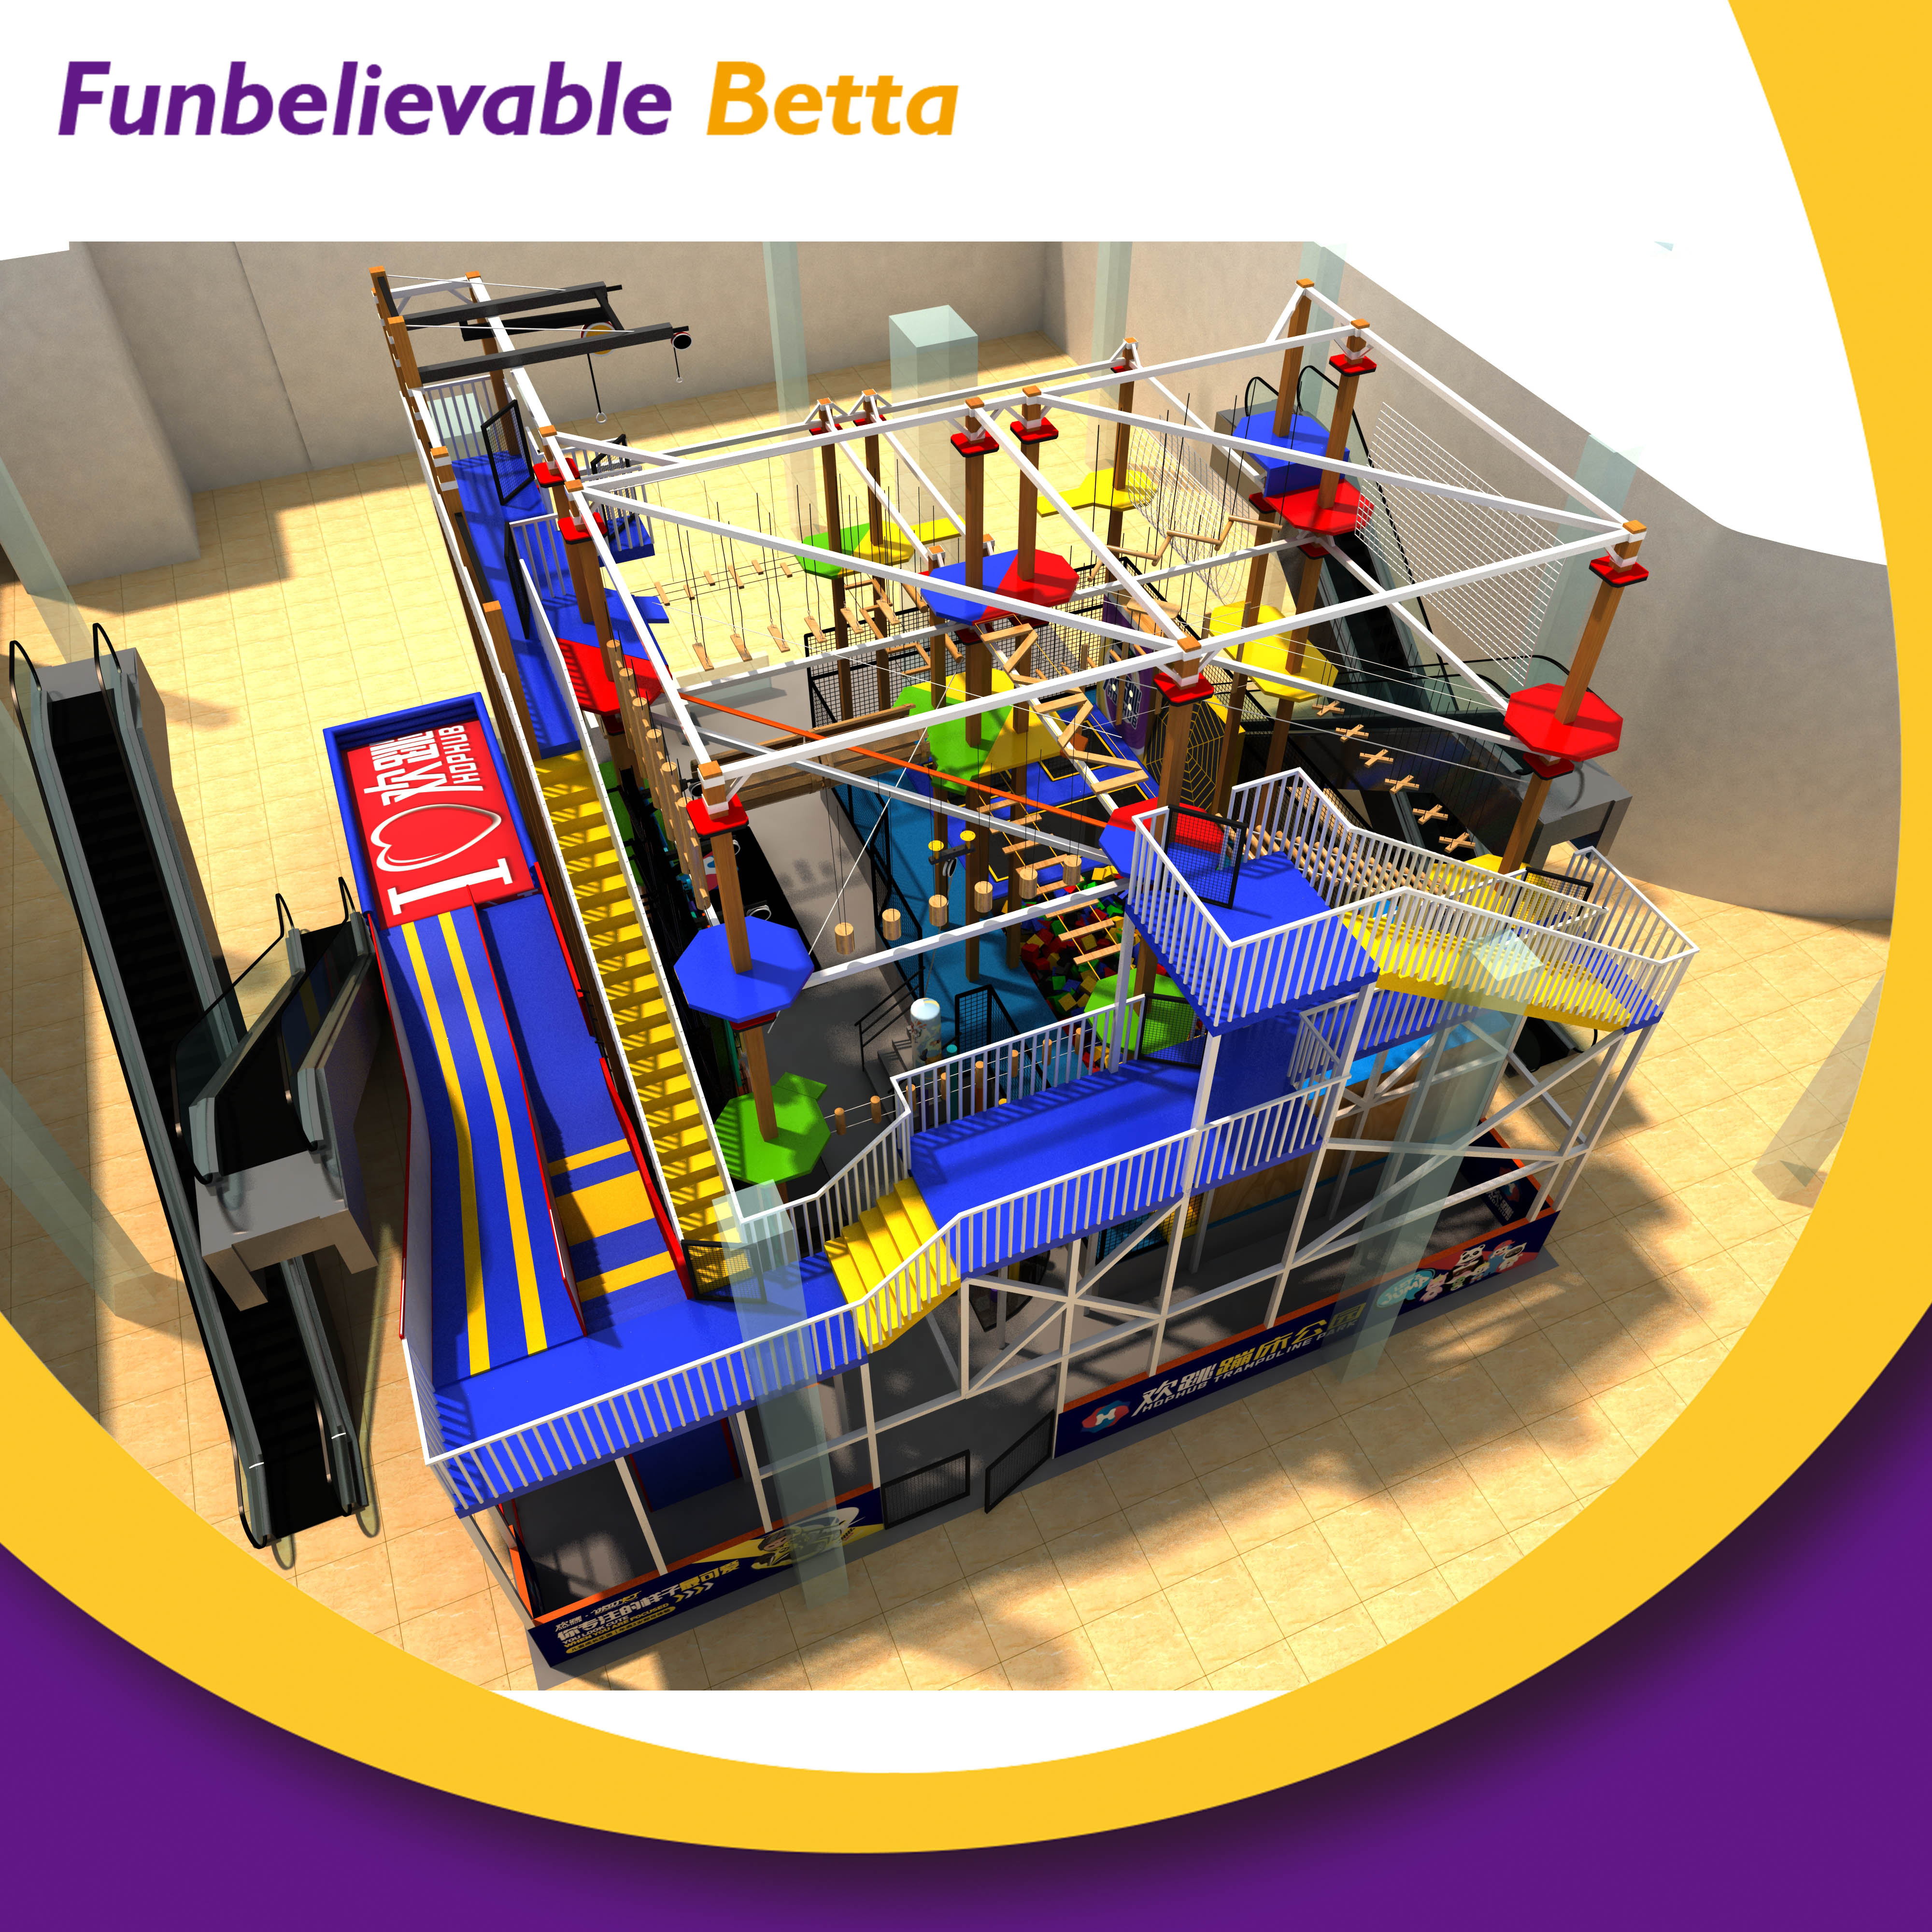 Bettaplay Rope Course Kids Playground Indoor Jumping Trampolines Parks Equipment